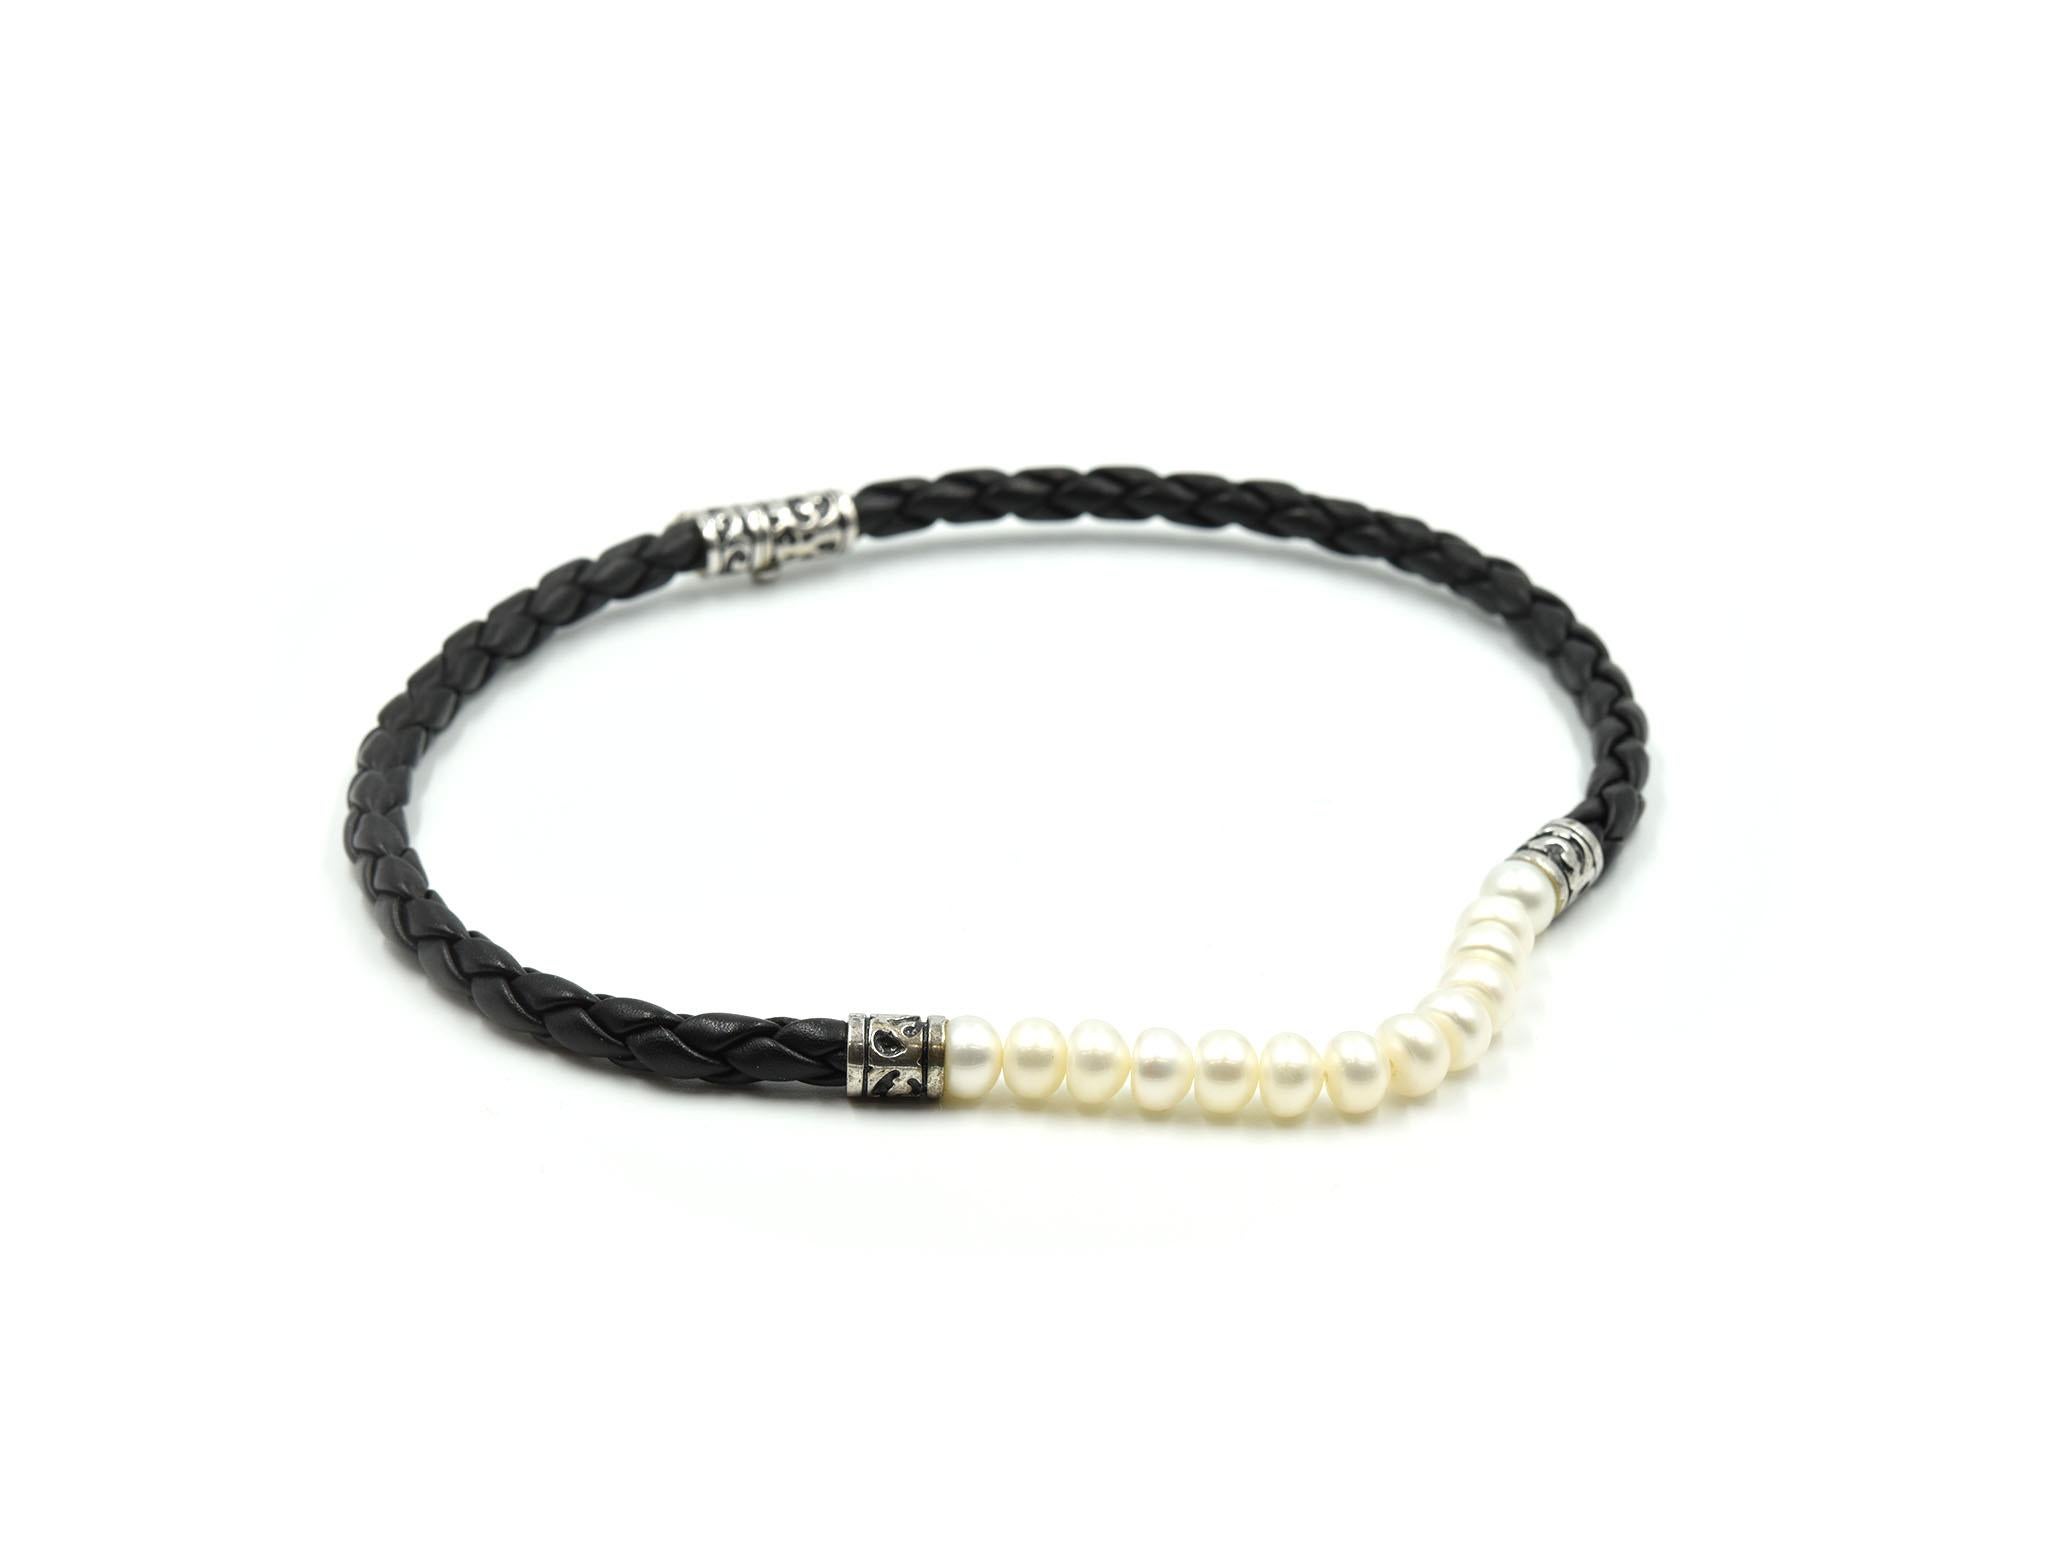 Women's Freshwater Pearl Black Leather Braid Necklace with Sterling Silver Clasp